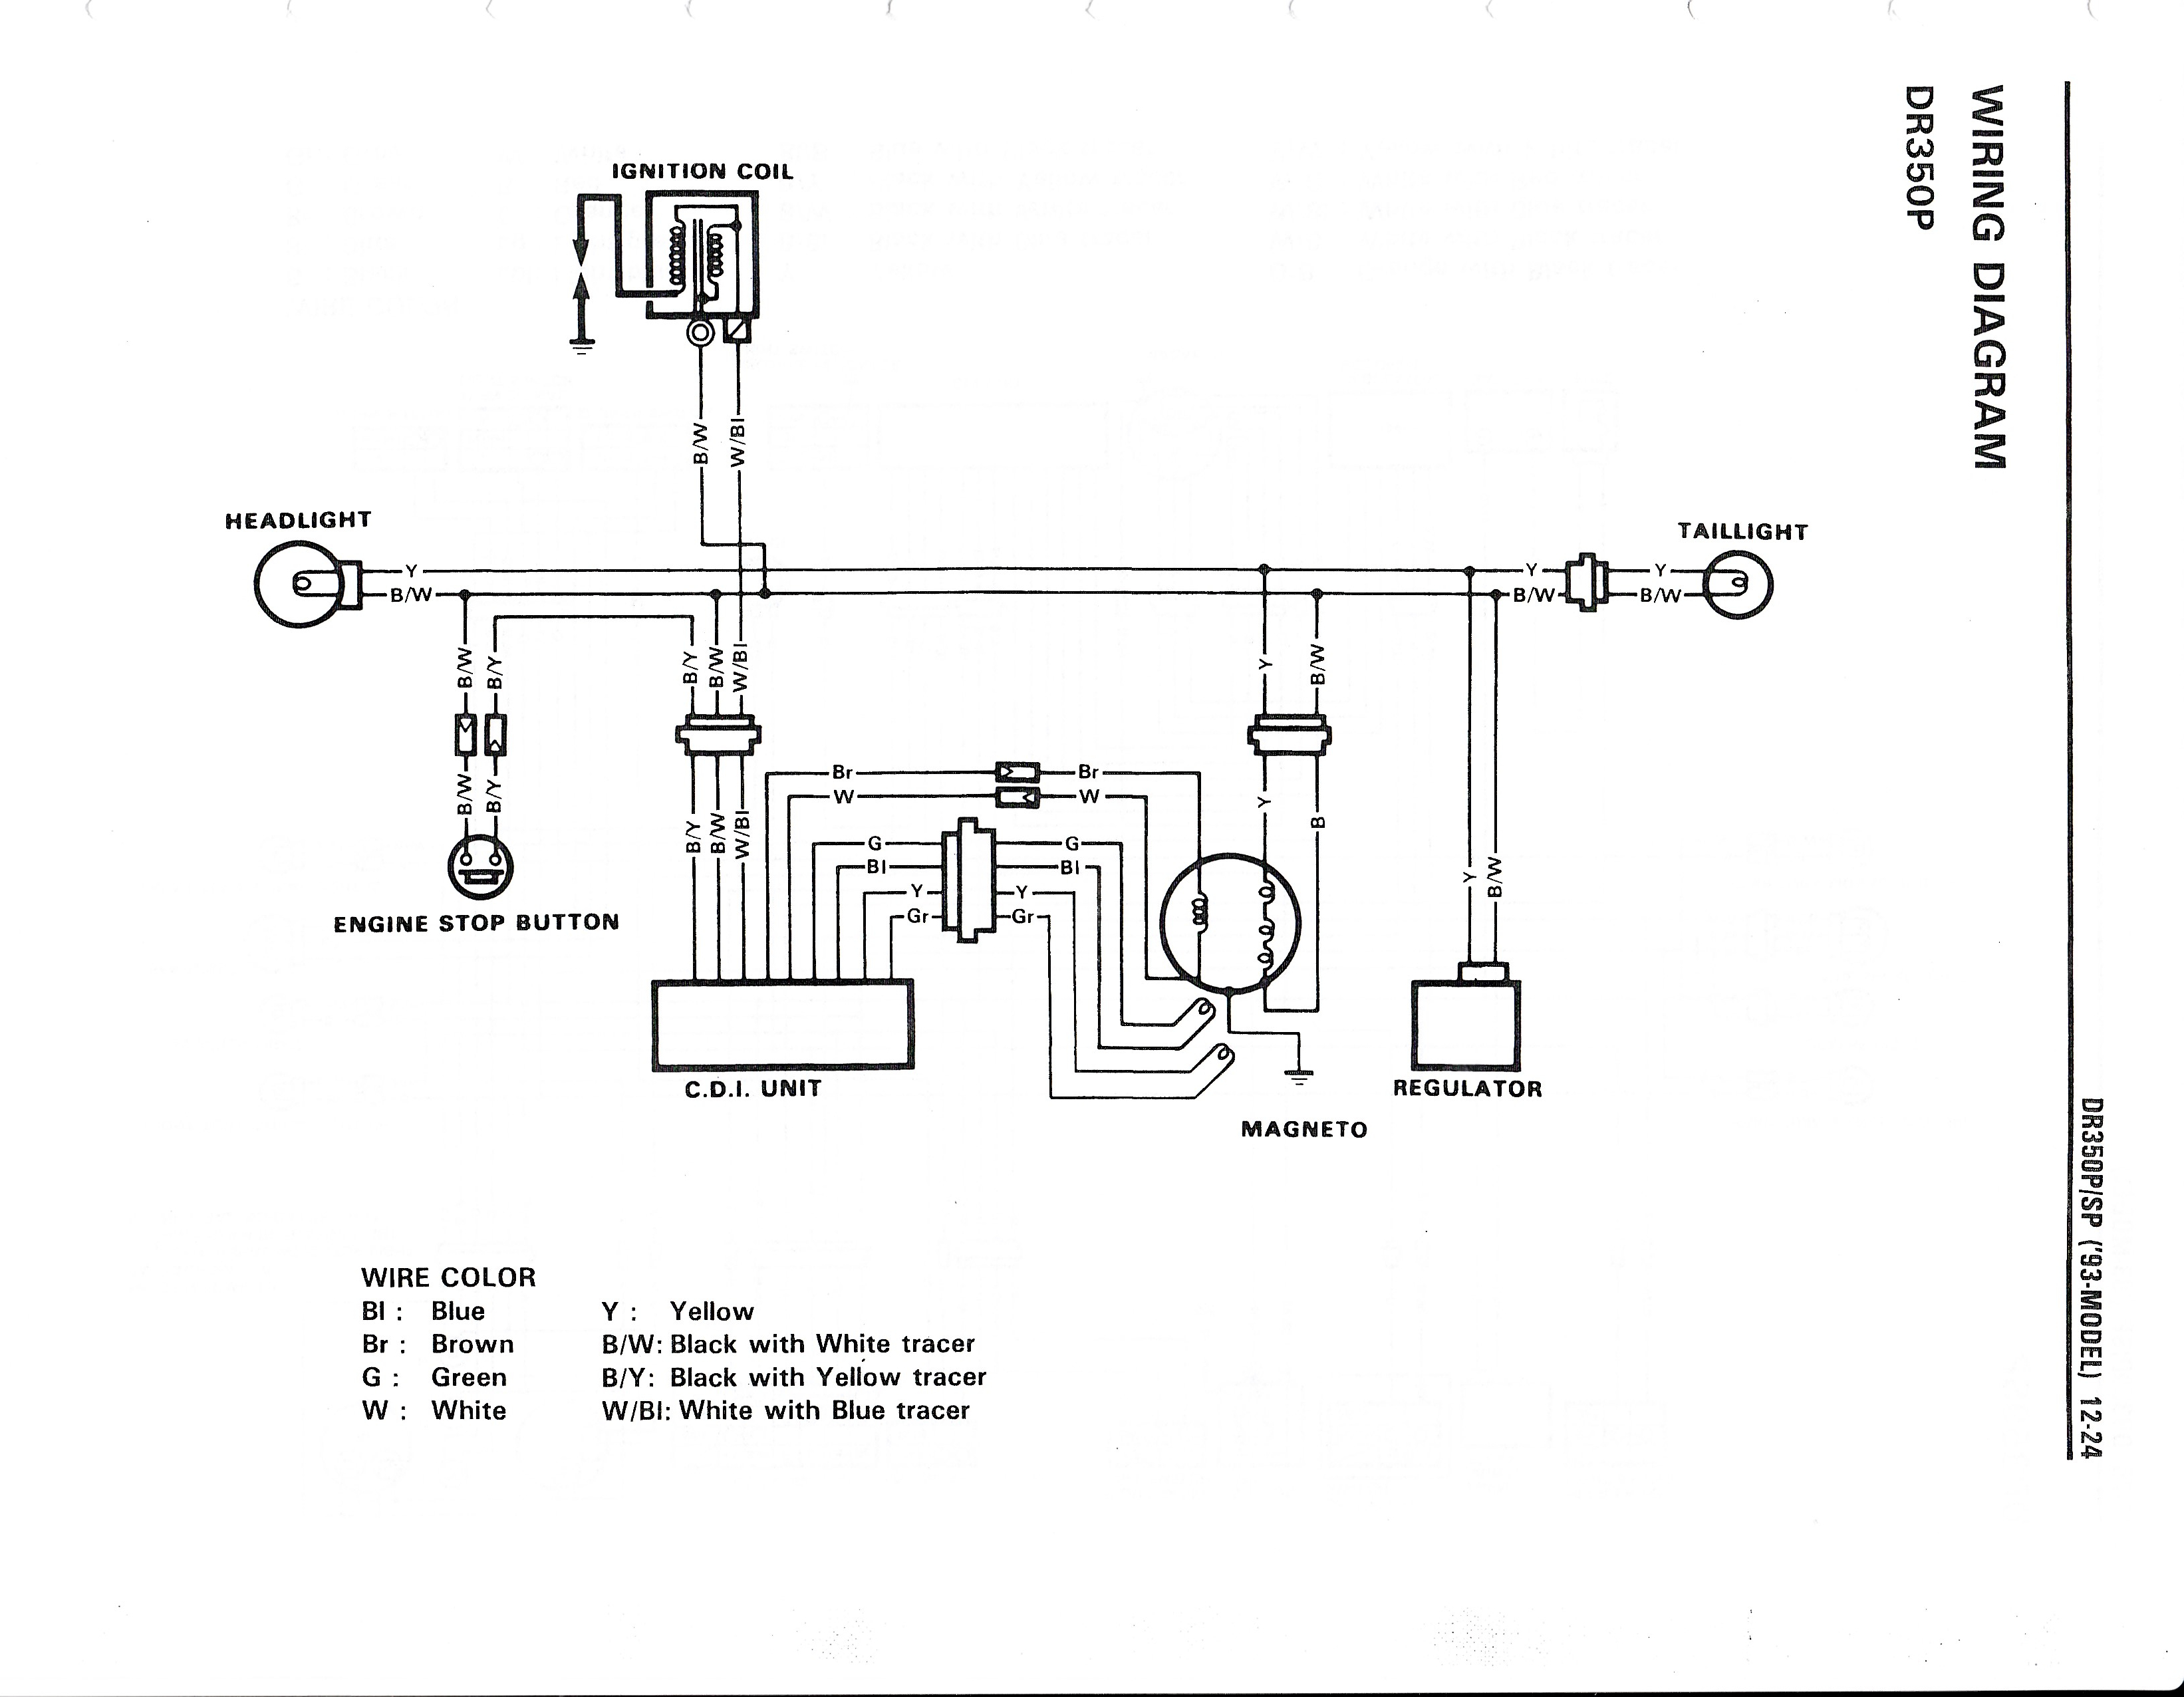 Wiring Diagram For The Dr350  1993 And Later Models